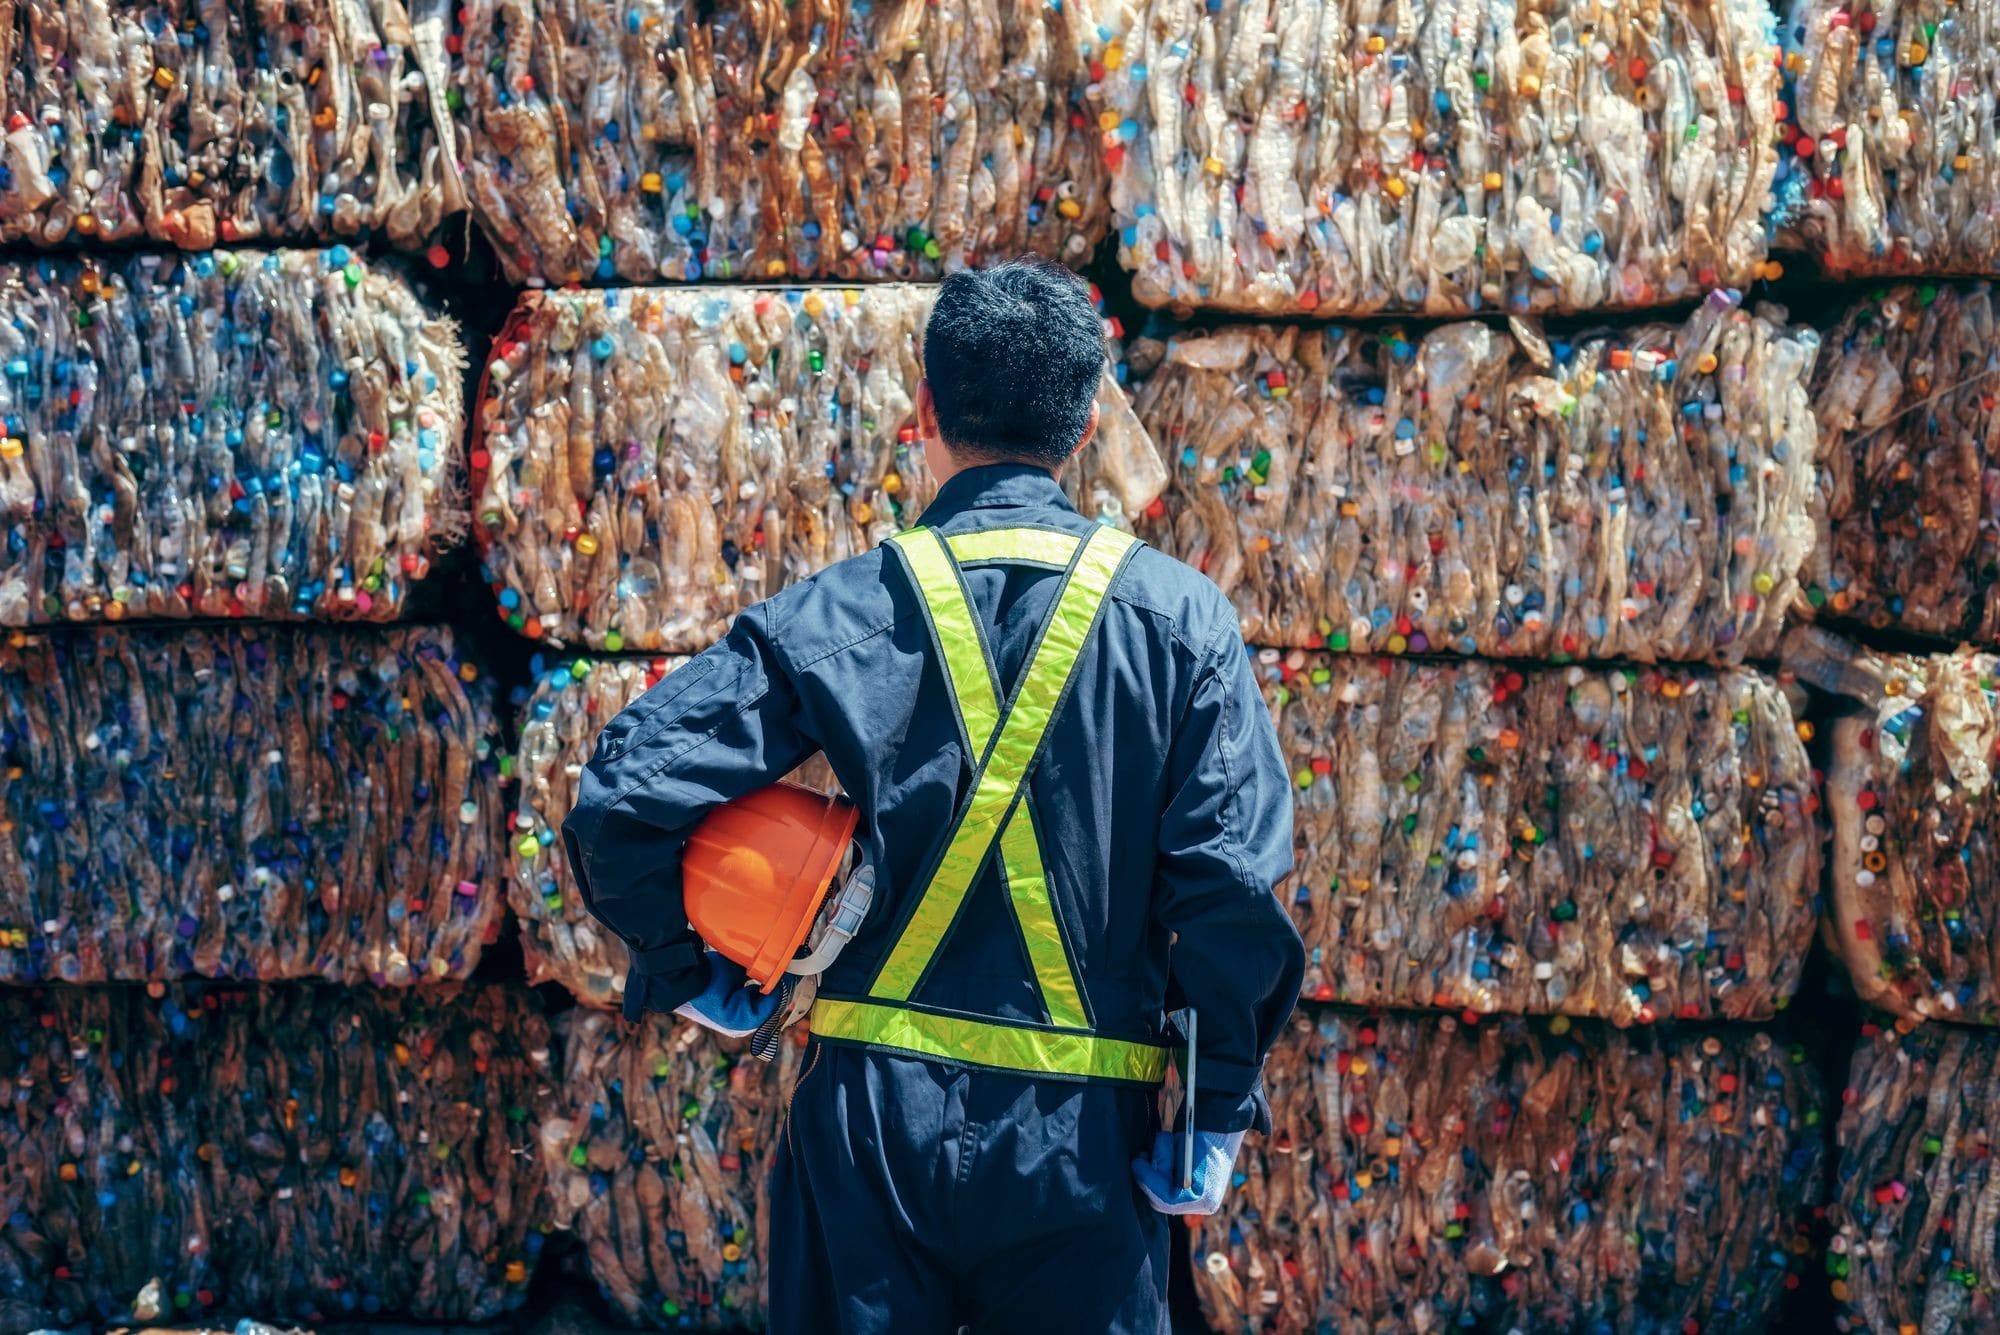 Man Looking Back The Plastic Bottle In The Recycling Industry